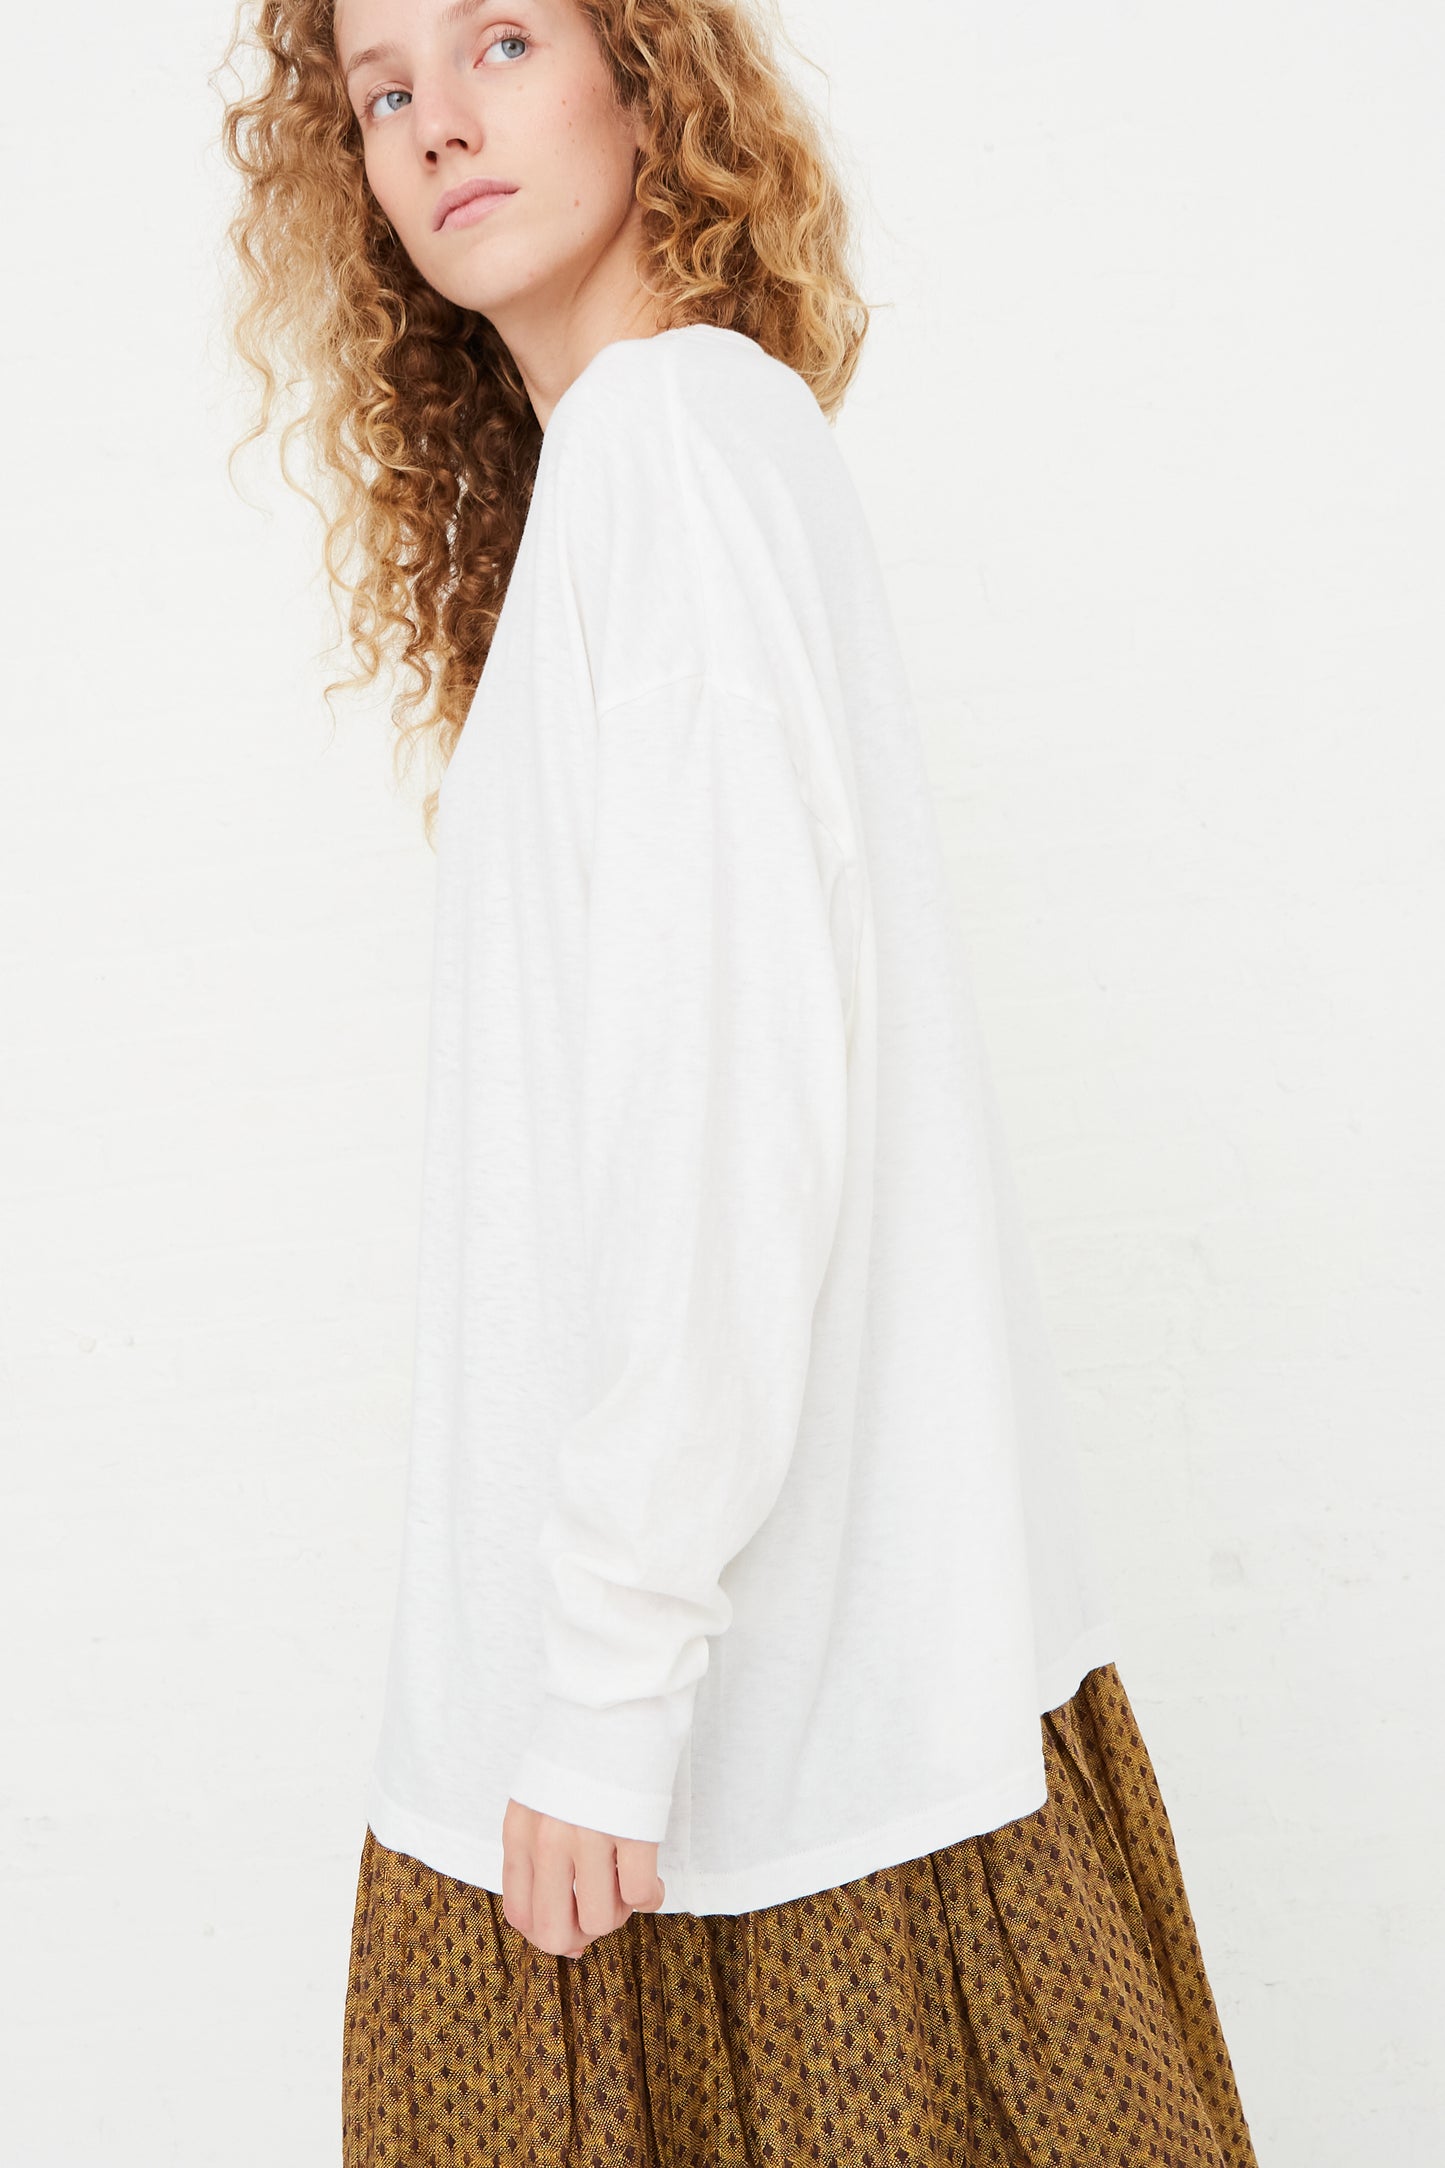 The model is wearing a Ichi Antiquités Cotton Loose Pullover in White.